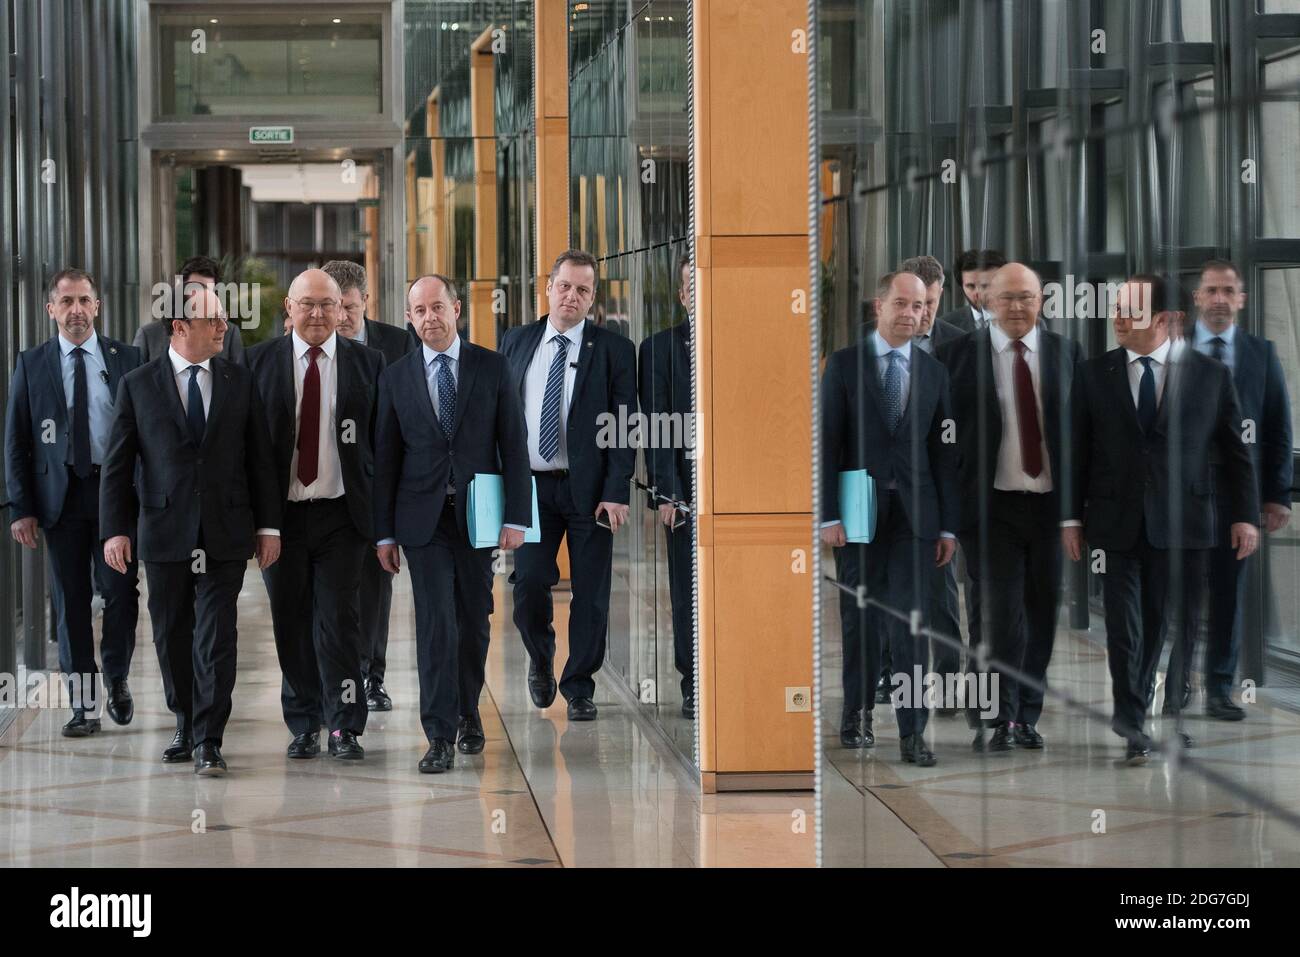 French President Francois Hollande, Minister of Justice Jean-Jacques Urvoas, Minister of the Economy and Finance Michel Sapin and AFA director Charles Duchaine arriving for the inauguration of the French Anti-corruption Agency (AFA), at the Ecoomy and Finance Ministry's headquarters, in Paris, France on March 23, 2017. Photo by Eliot Blondet/ABACAPRESS.COM Stock Photo